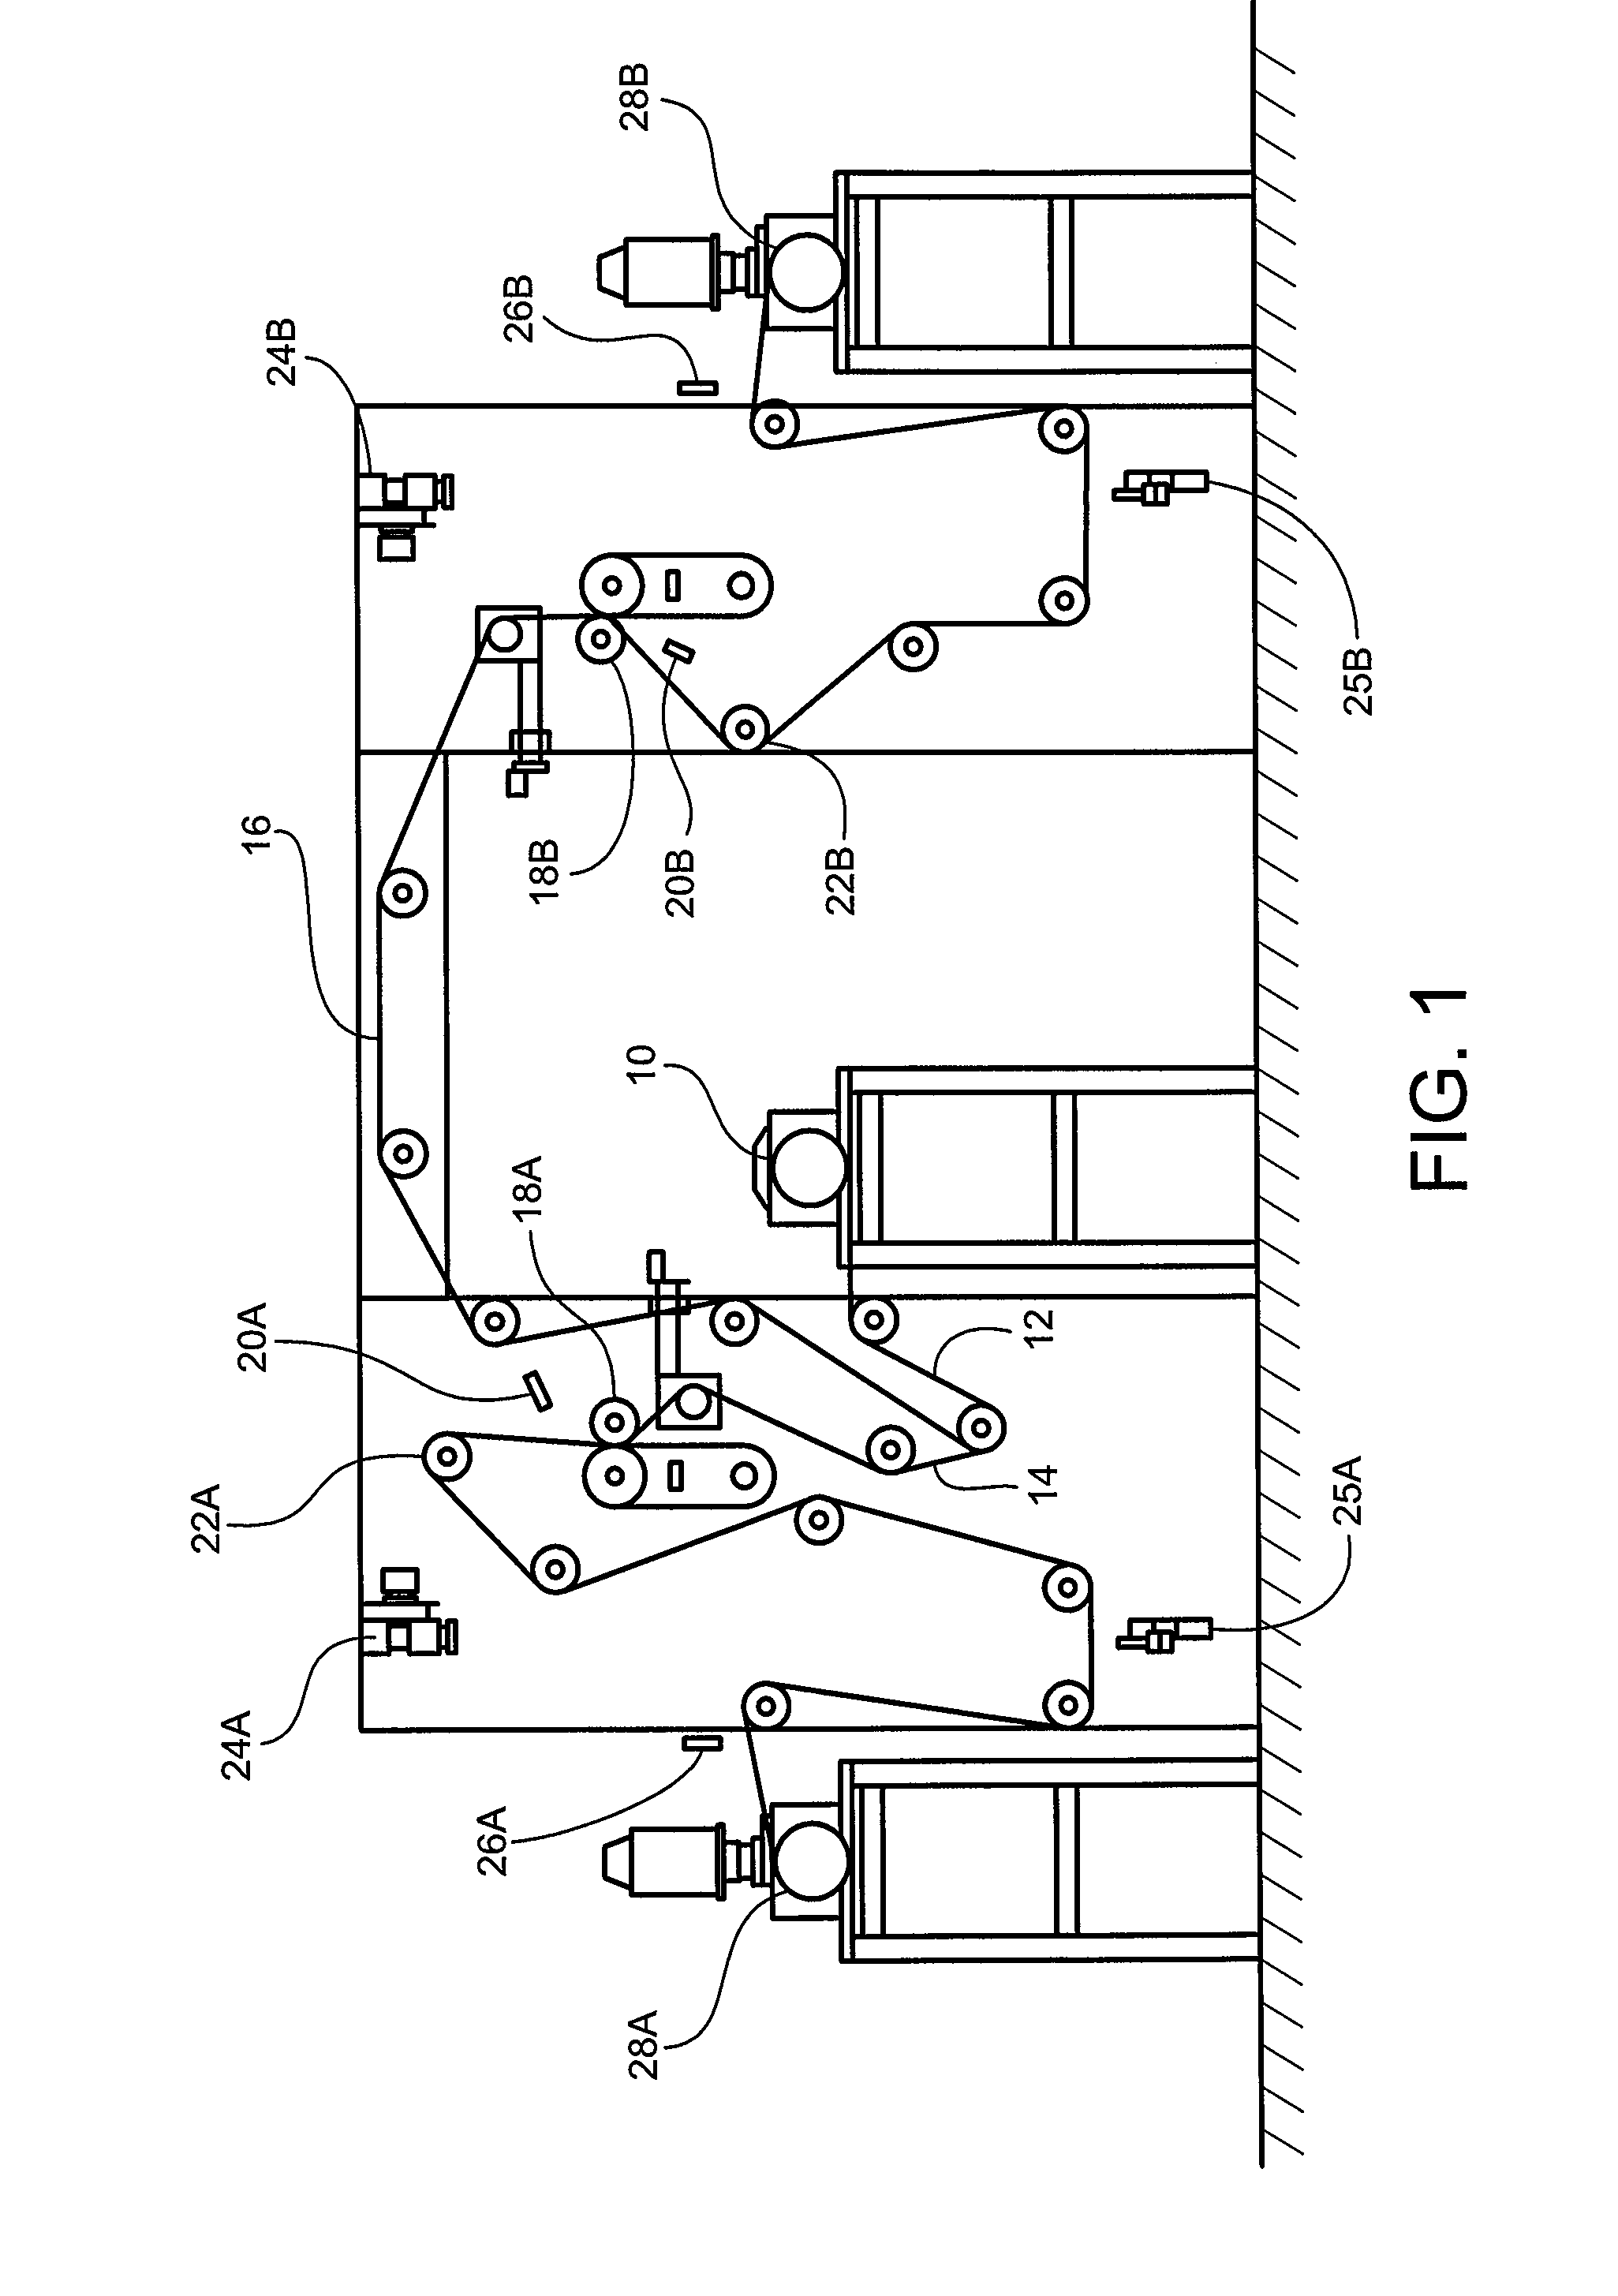 Continuous web inline testing apparatus, defect mapping system and related methods